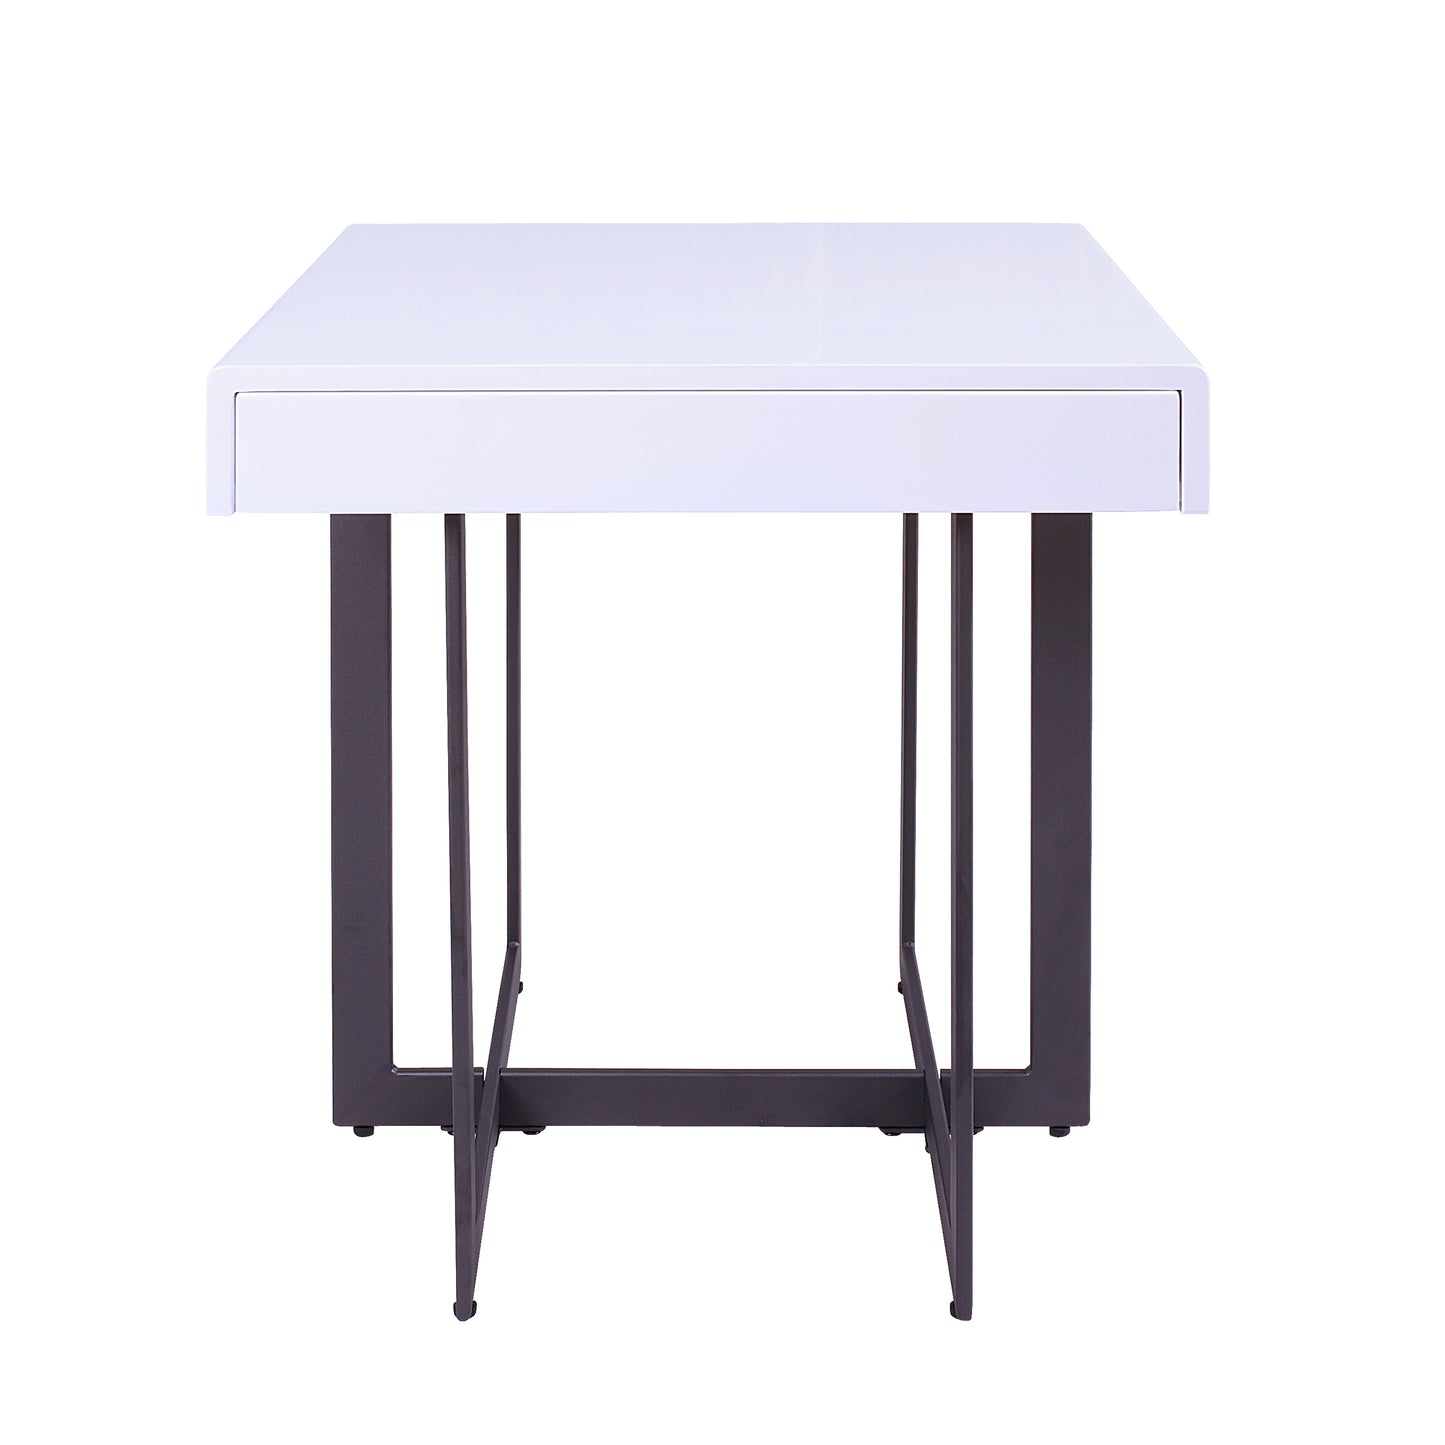 Front-facing end table only from a three-piece modern white high gloss and gunmetal storage coffee table set with hidden drawer open on a white background